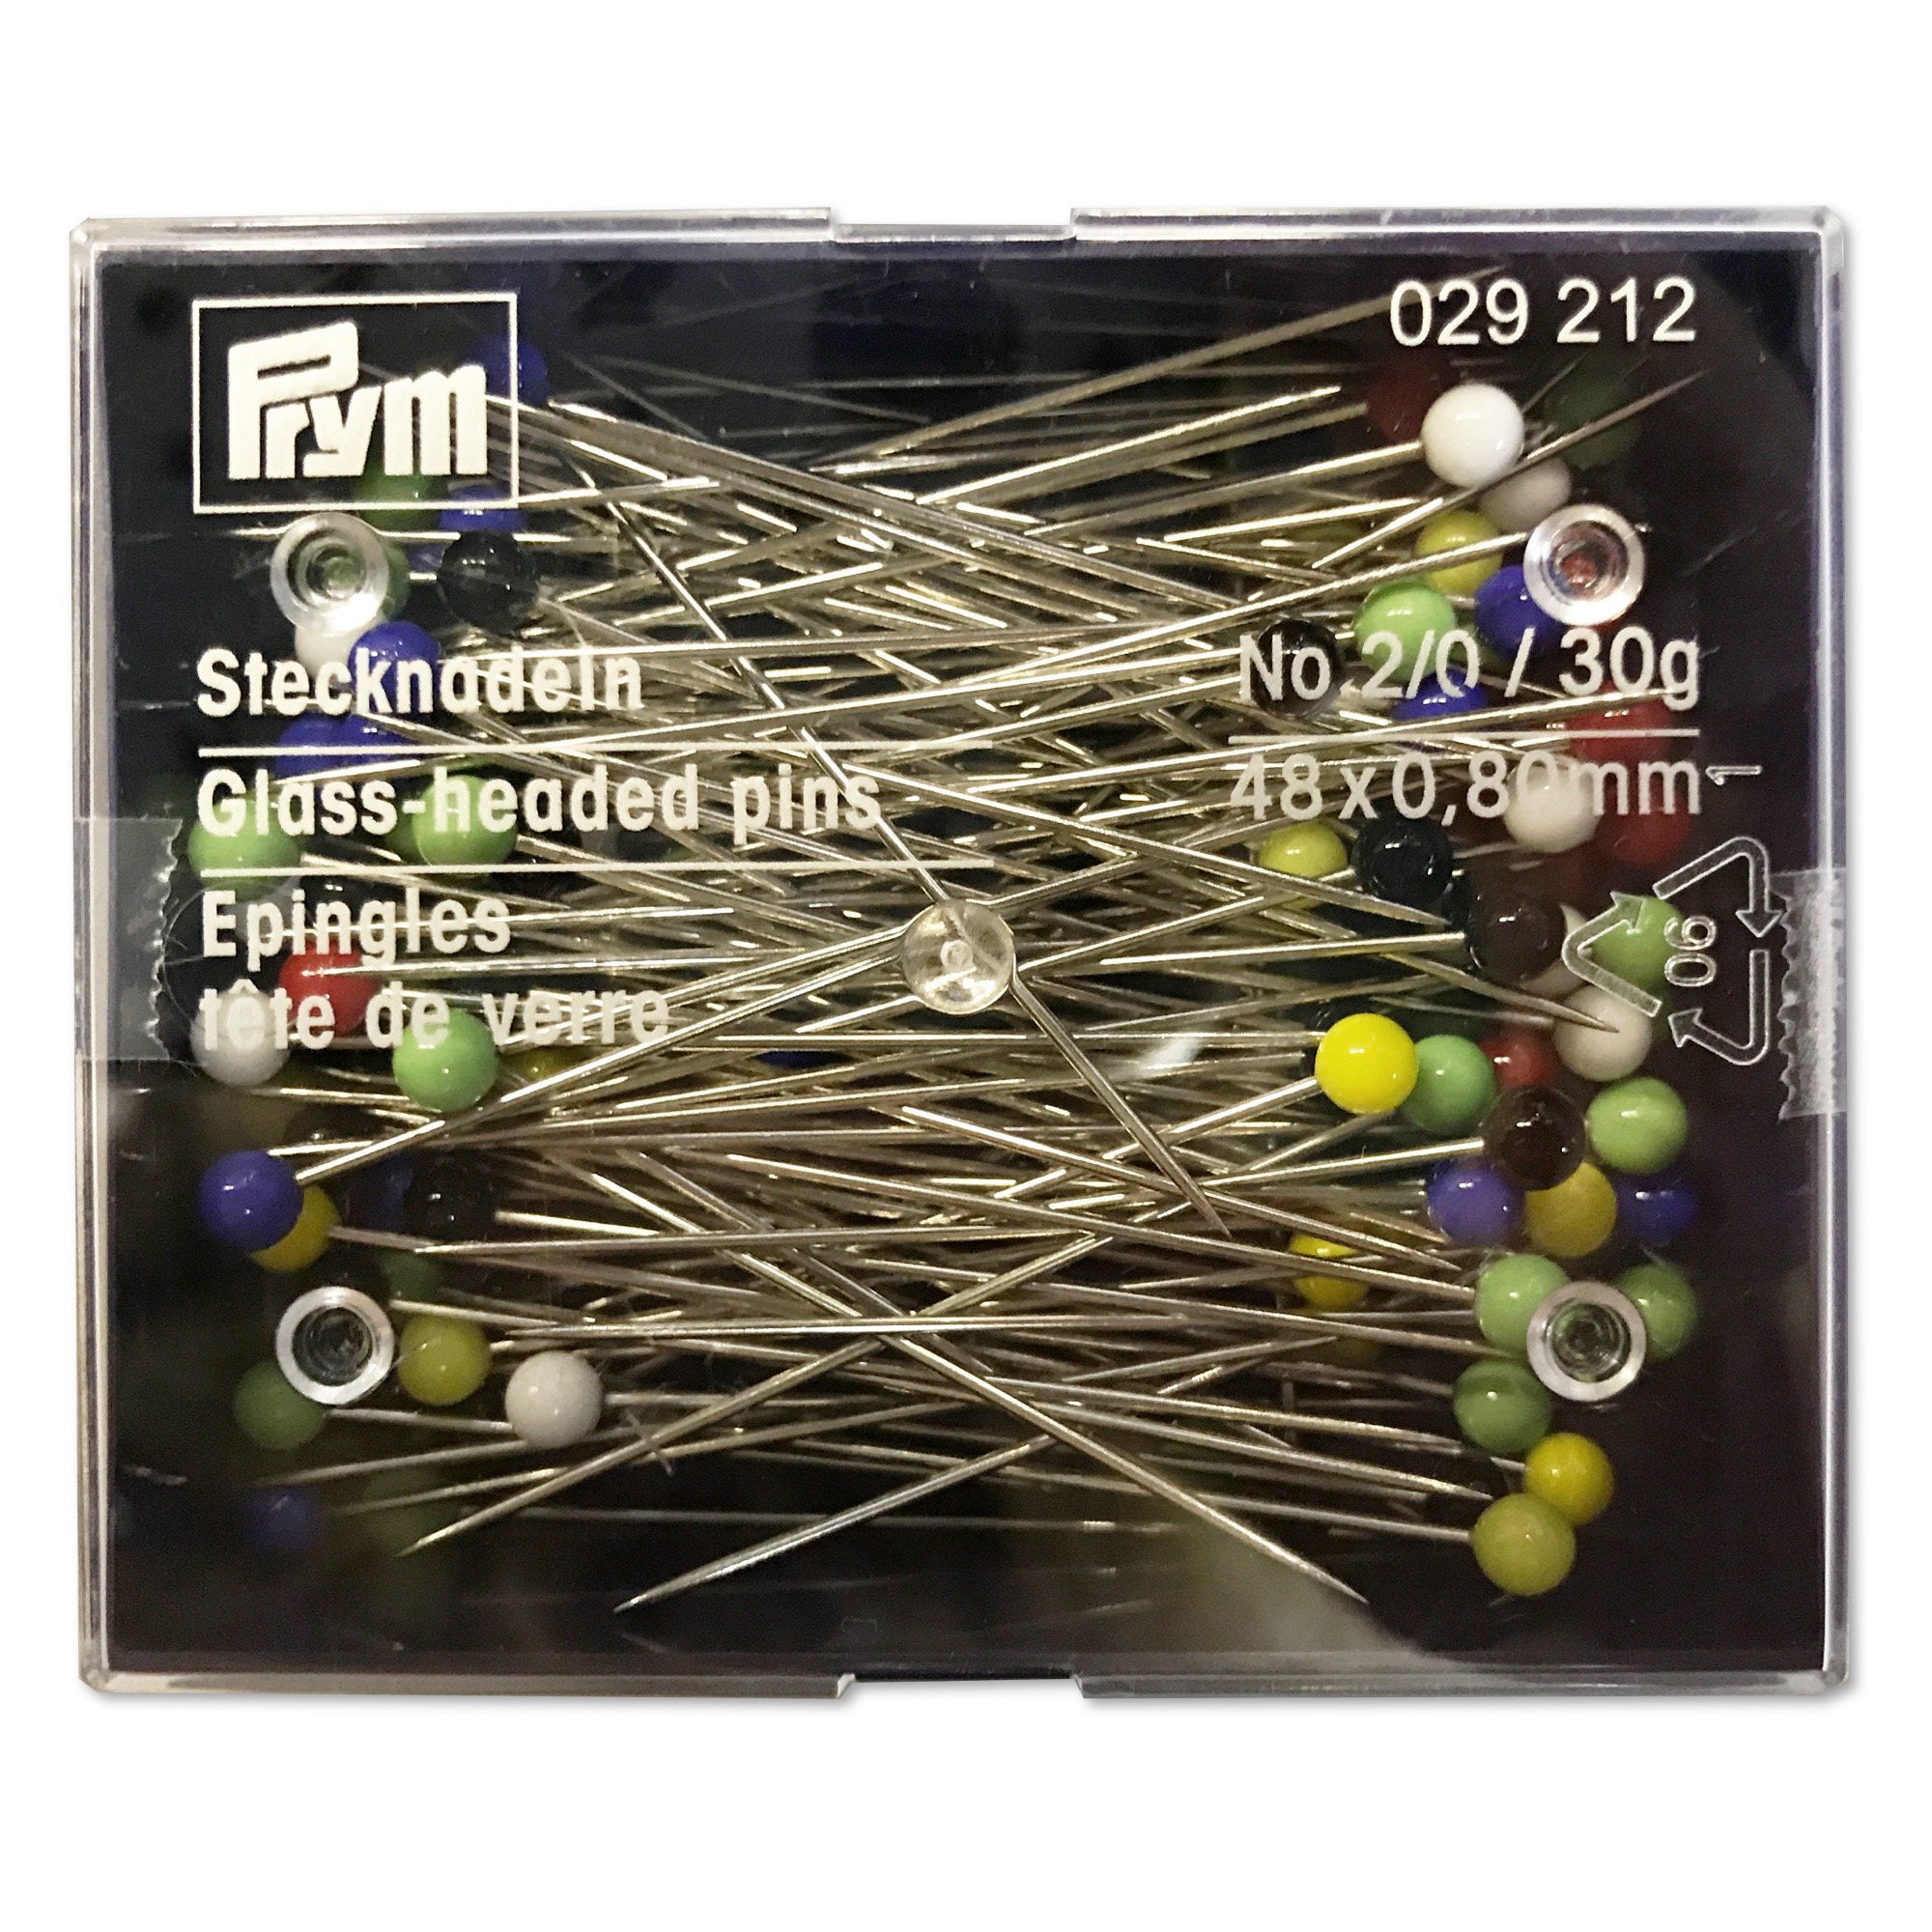 Glass Head Pins Size 22 - Assorted Colors - MyNotions